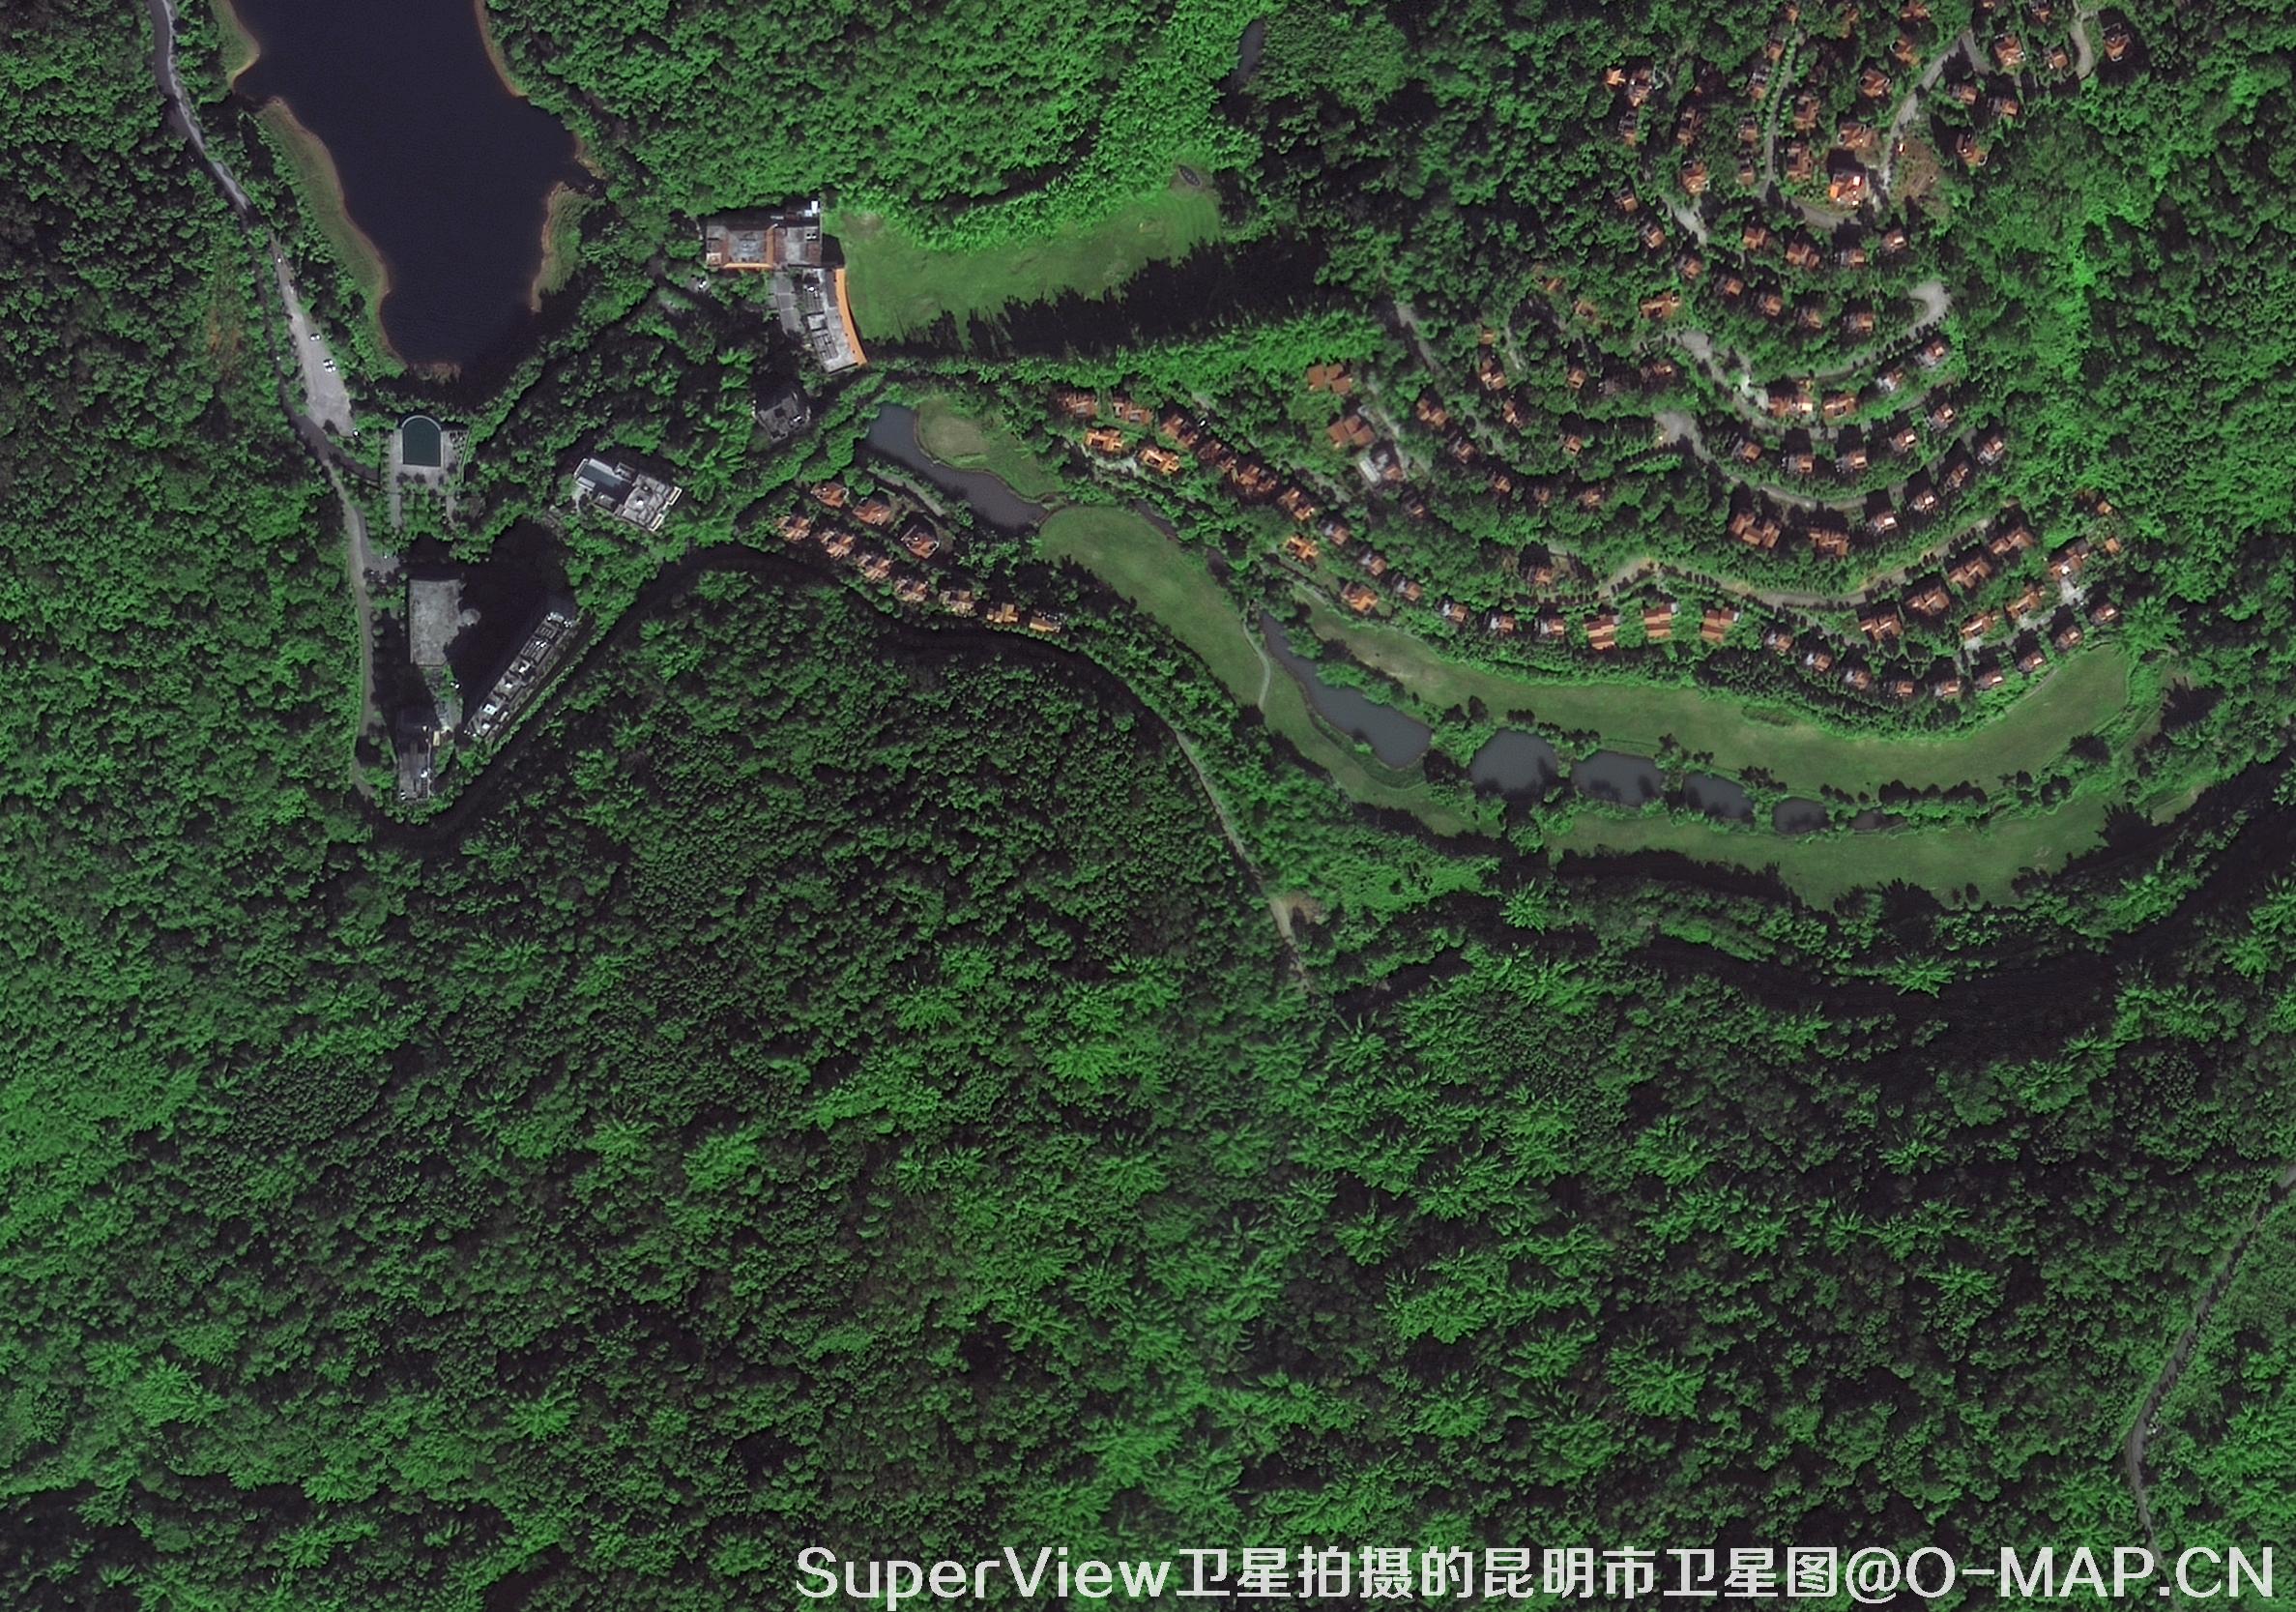 0.5-meter resolution images of SuperView Satellite